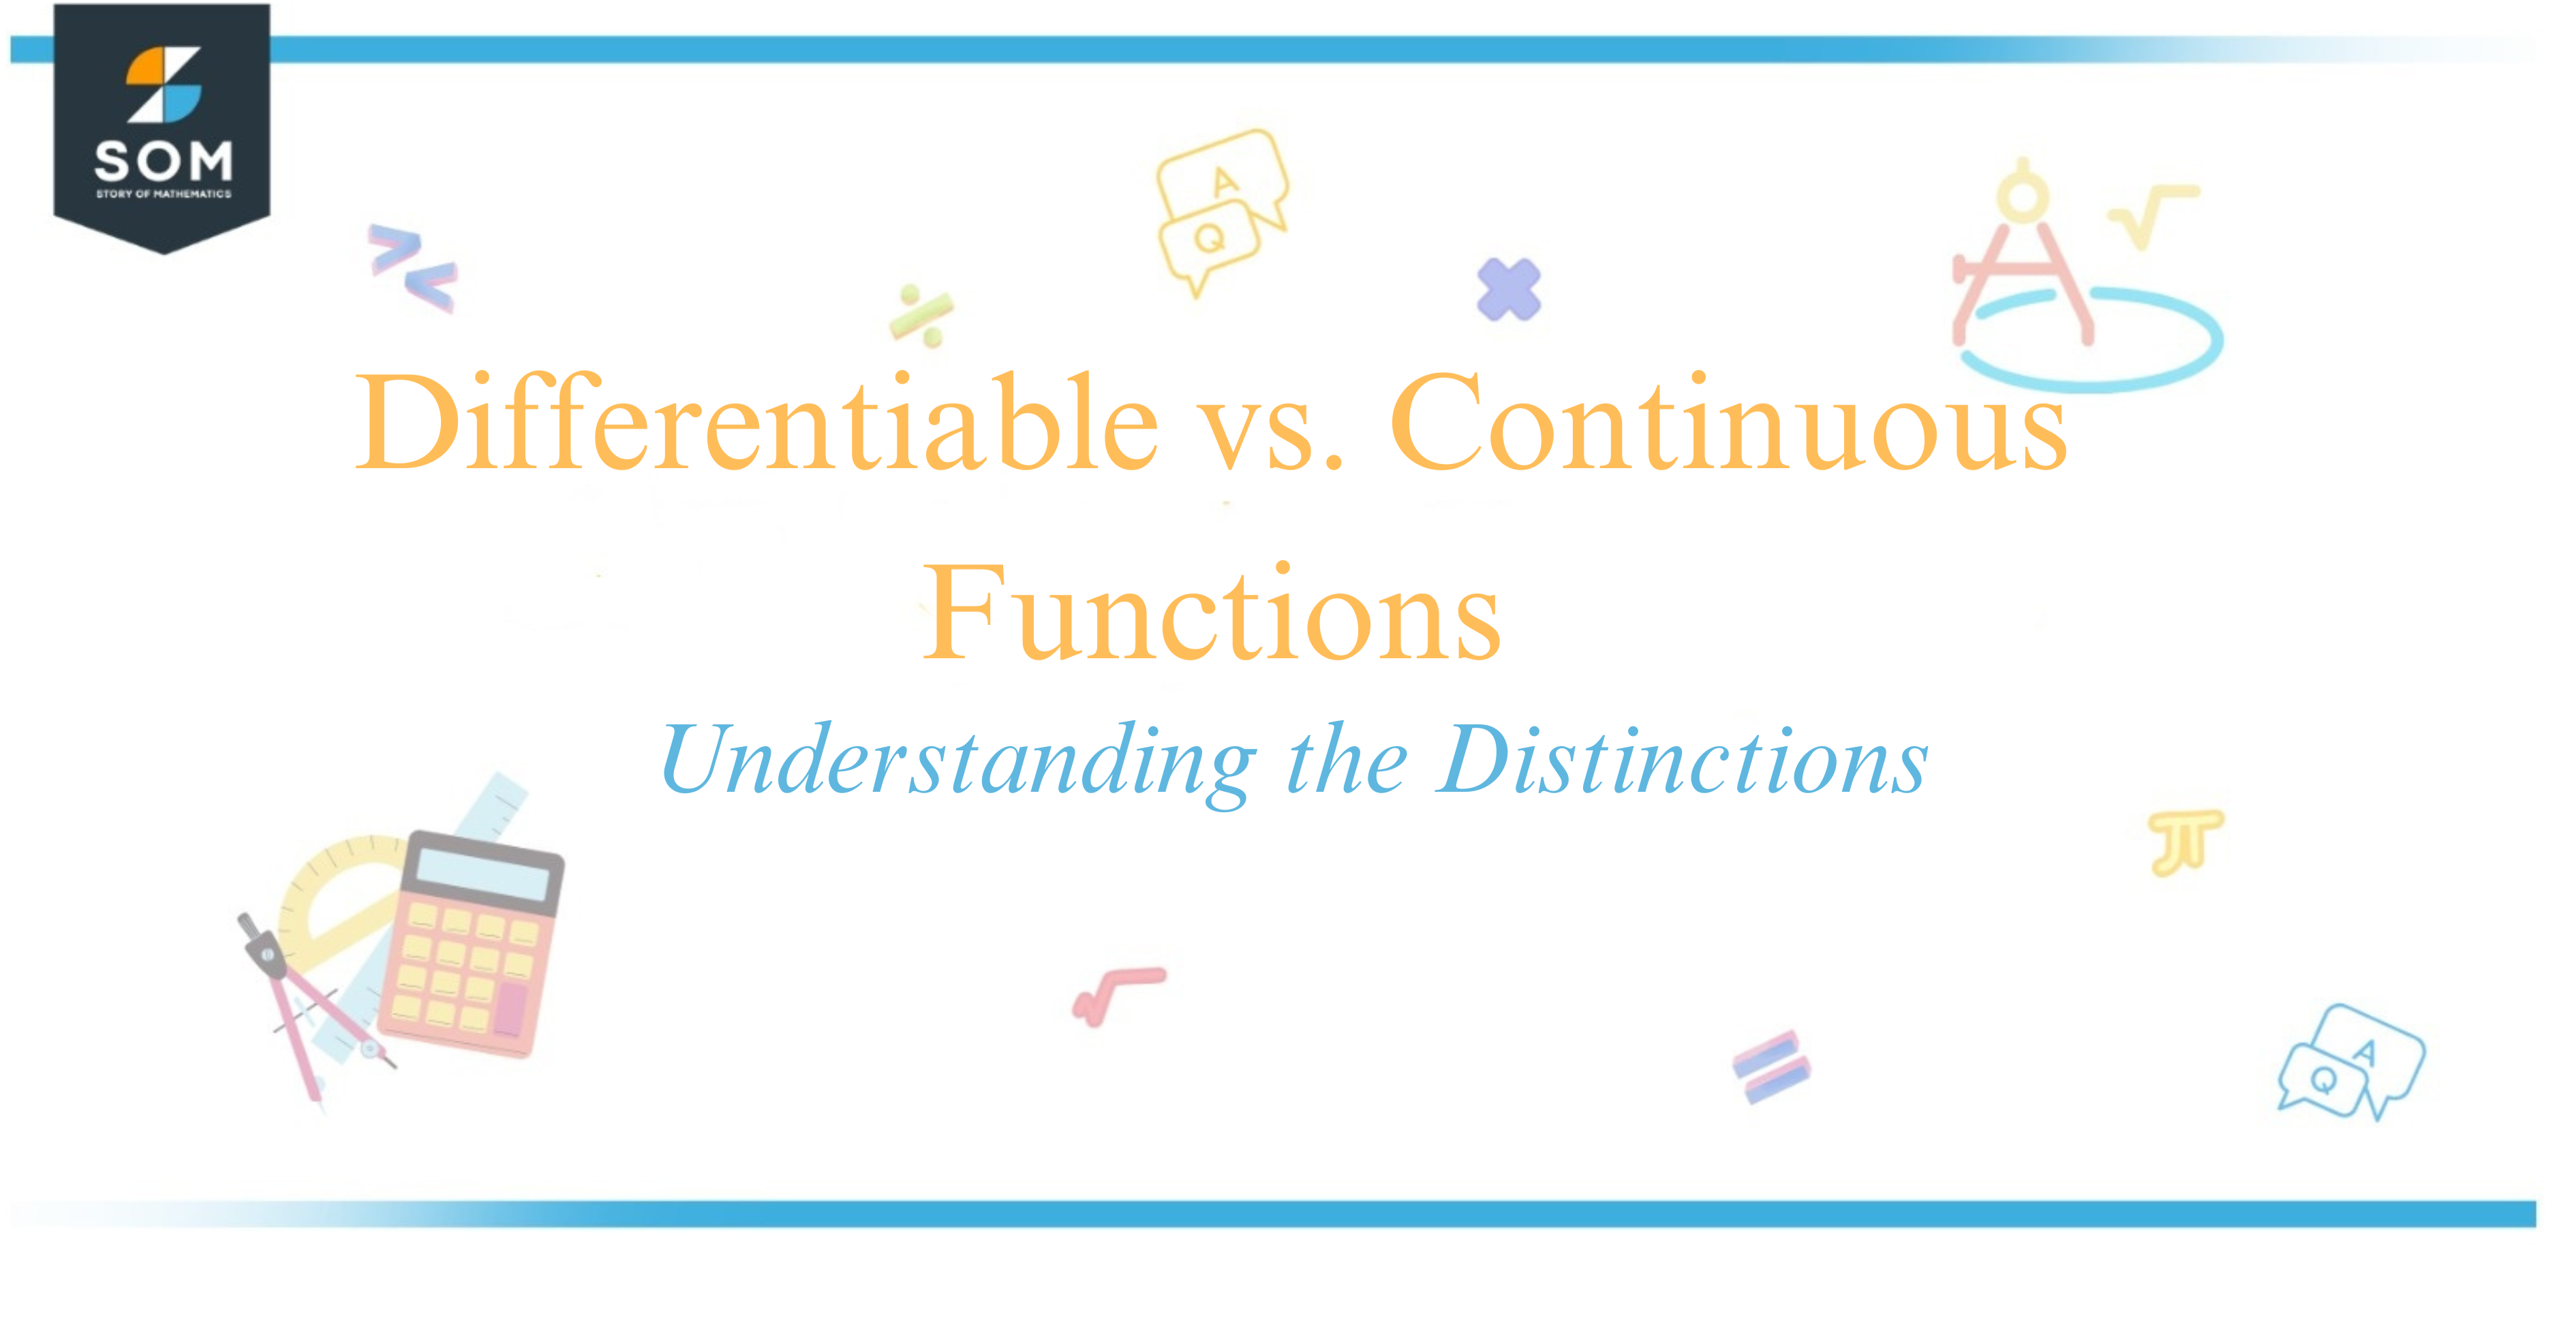 Differentiable vs. Continuous Functions Understanding the Distinctions